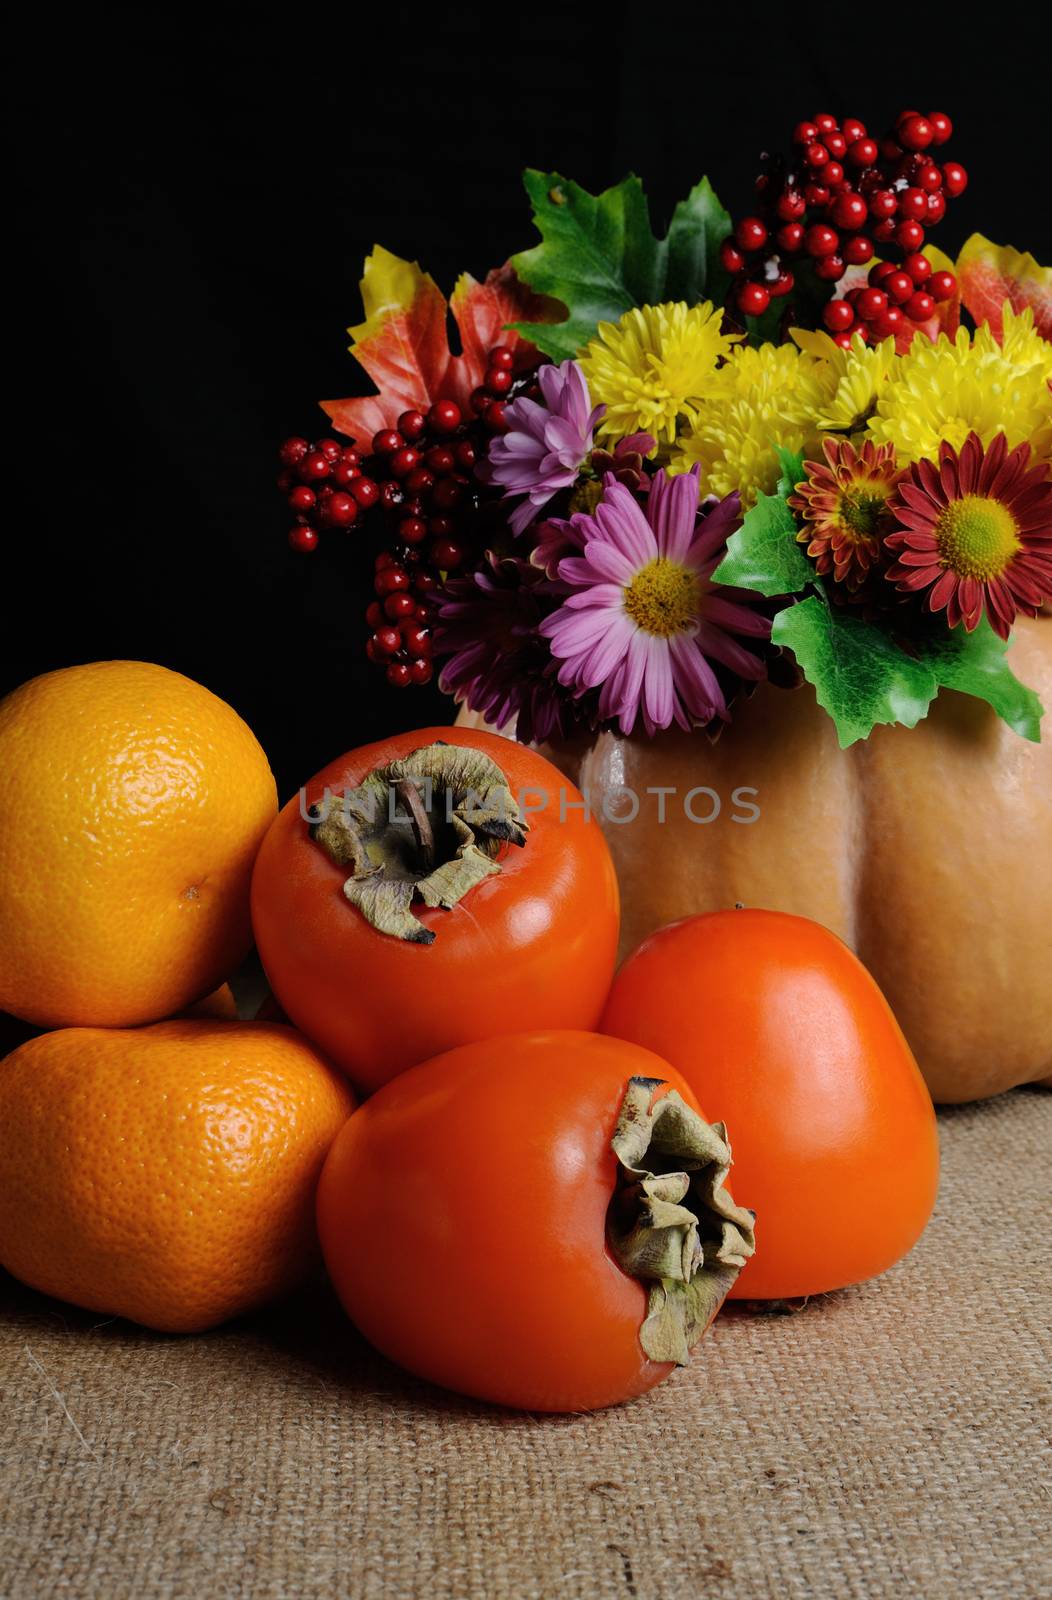 Persimmons, tangerines by Apolonia